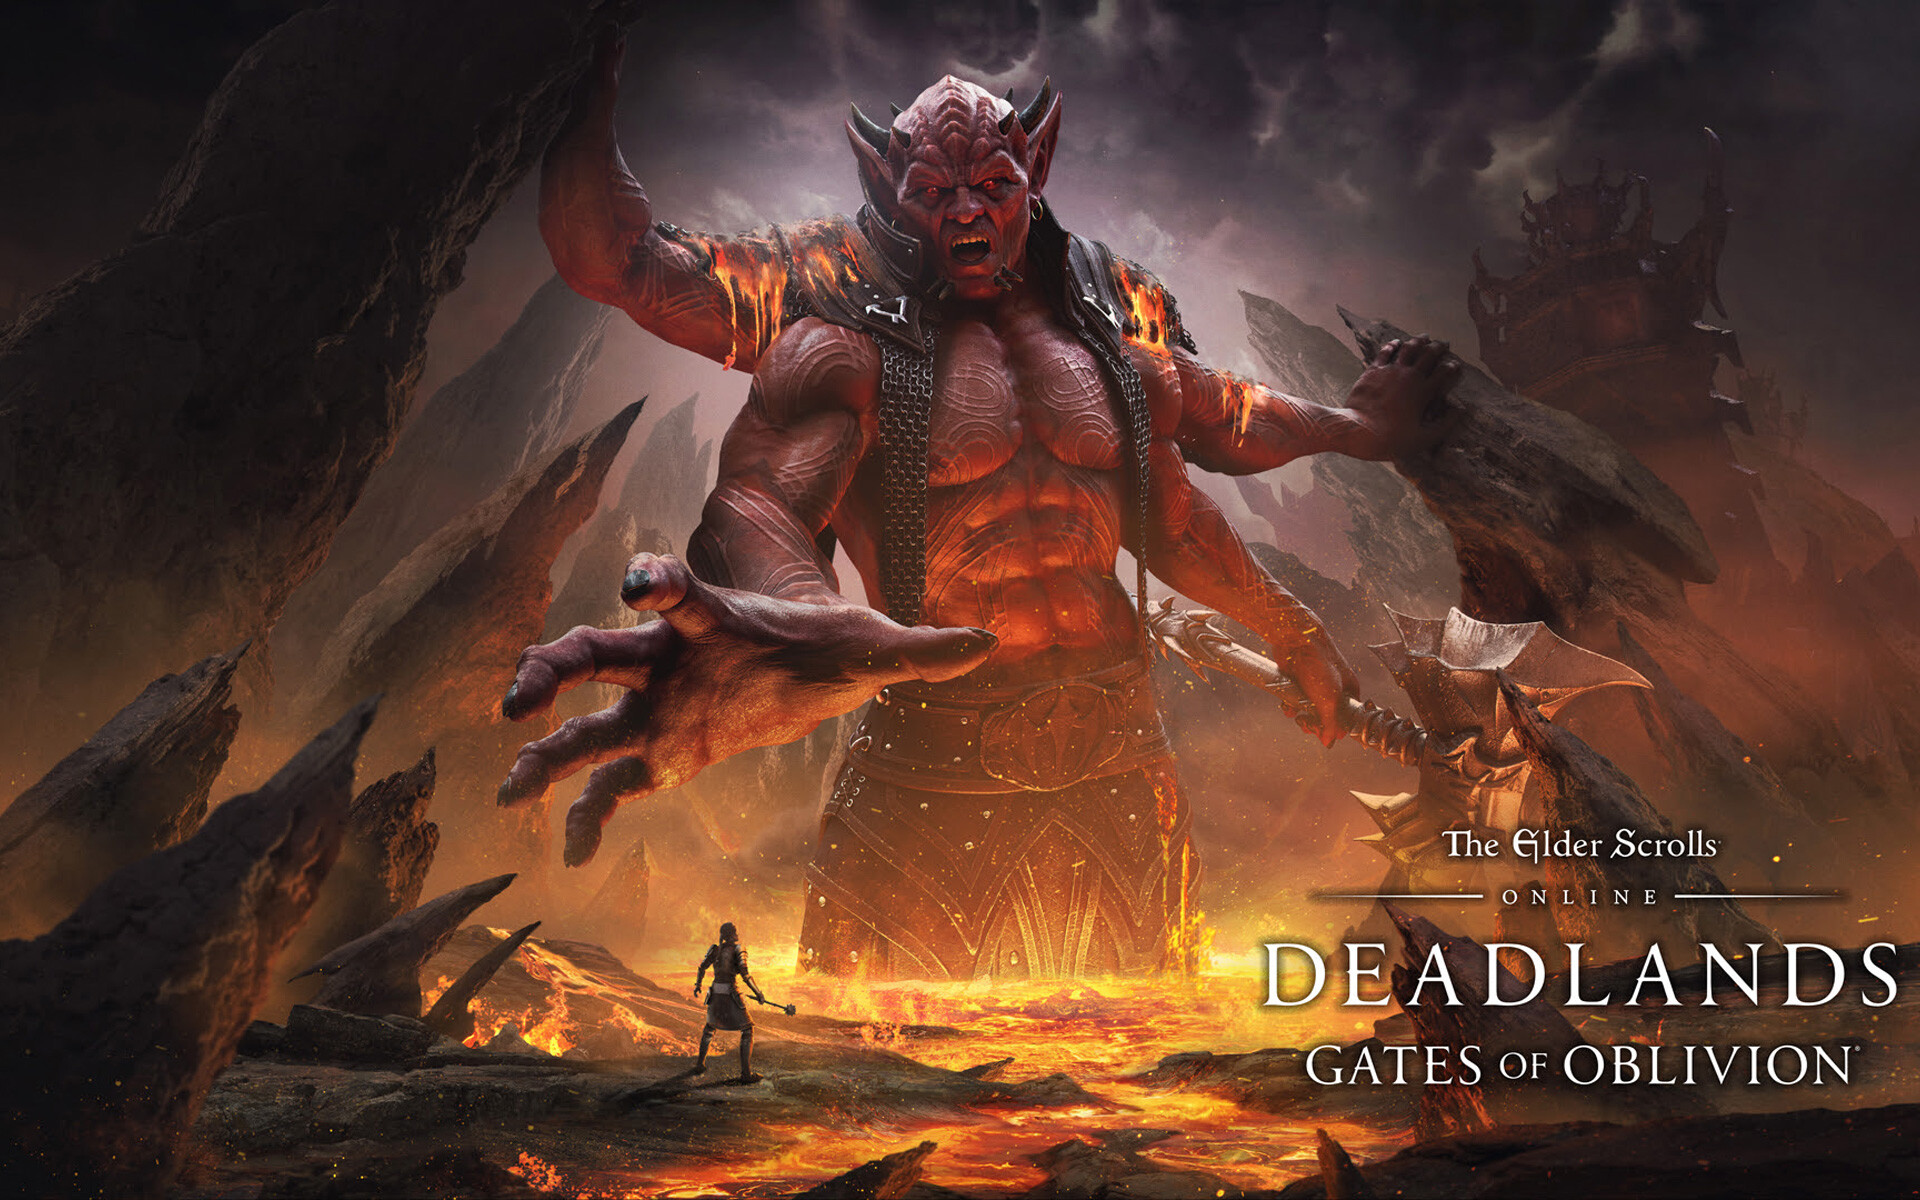 The Elder Scrolls: The Deadlands, Released on November 1, 2021, Concluded the Gates of Oblivion storyline with the introduction of the Deadlands zone. 1920x1200 HD Wallpaper.